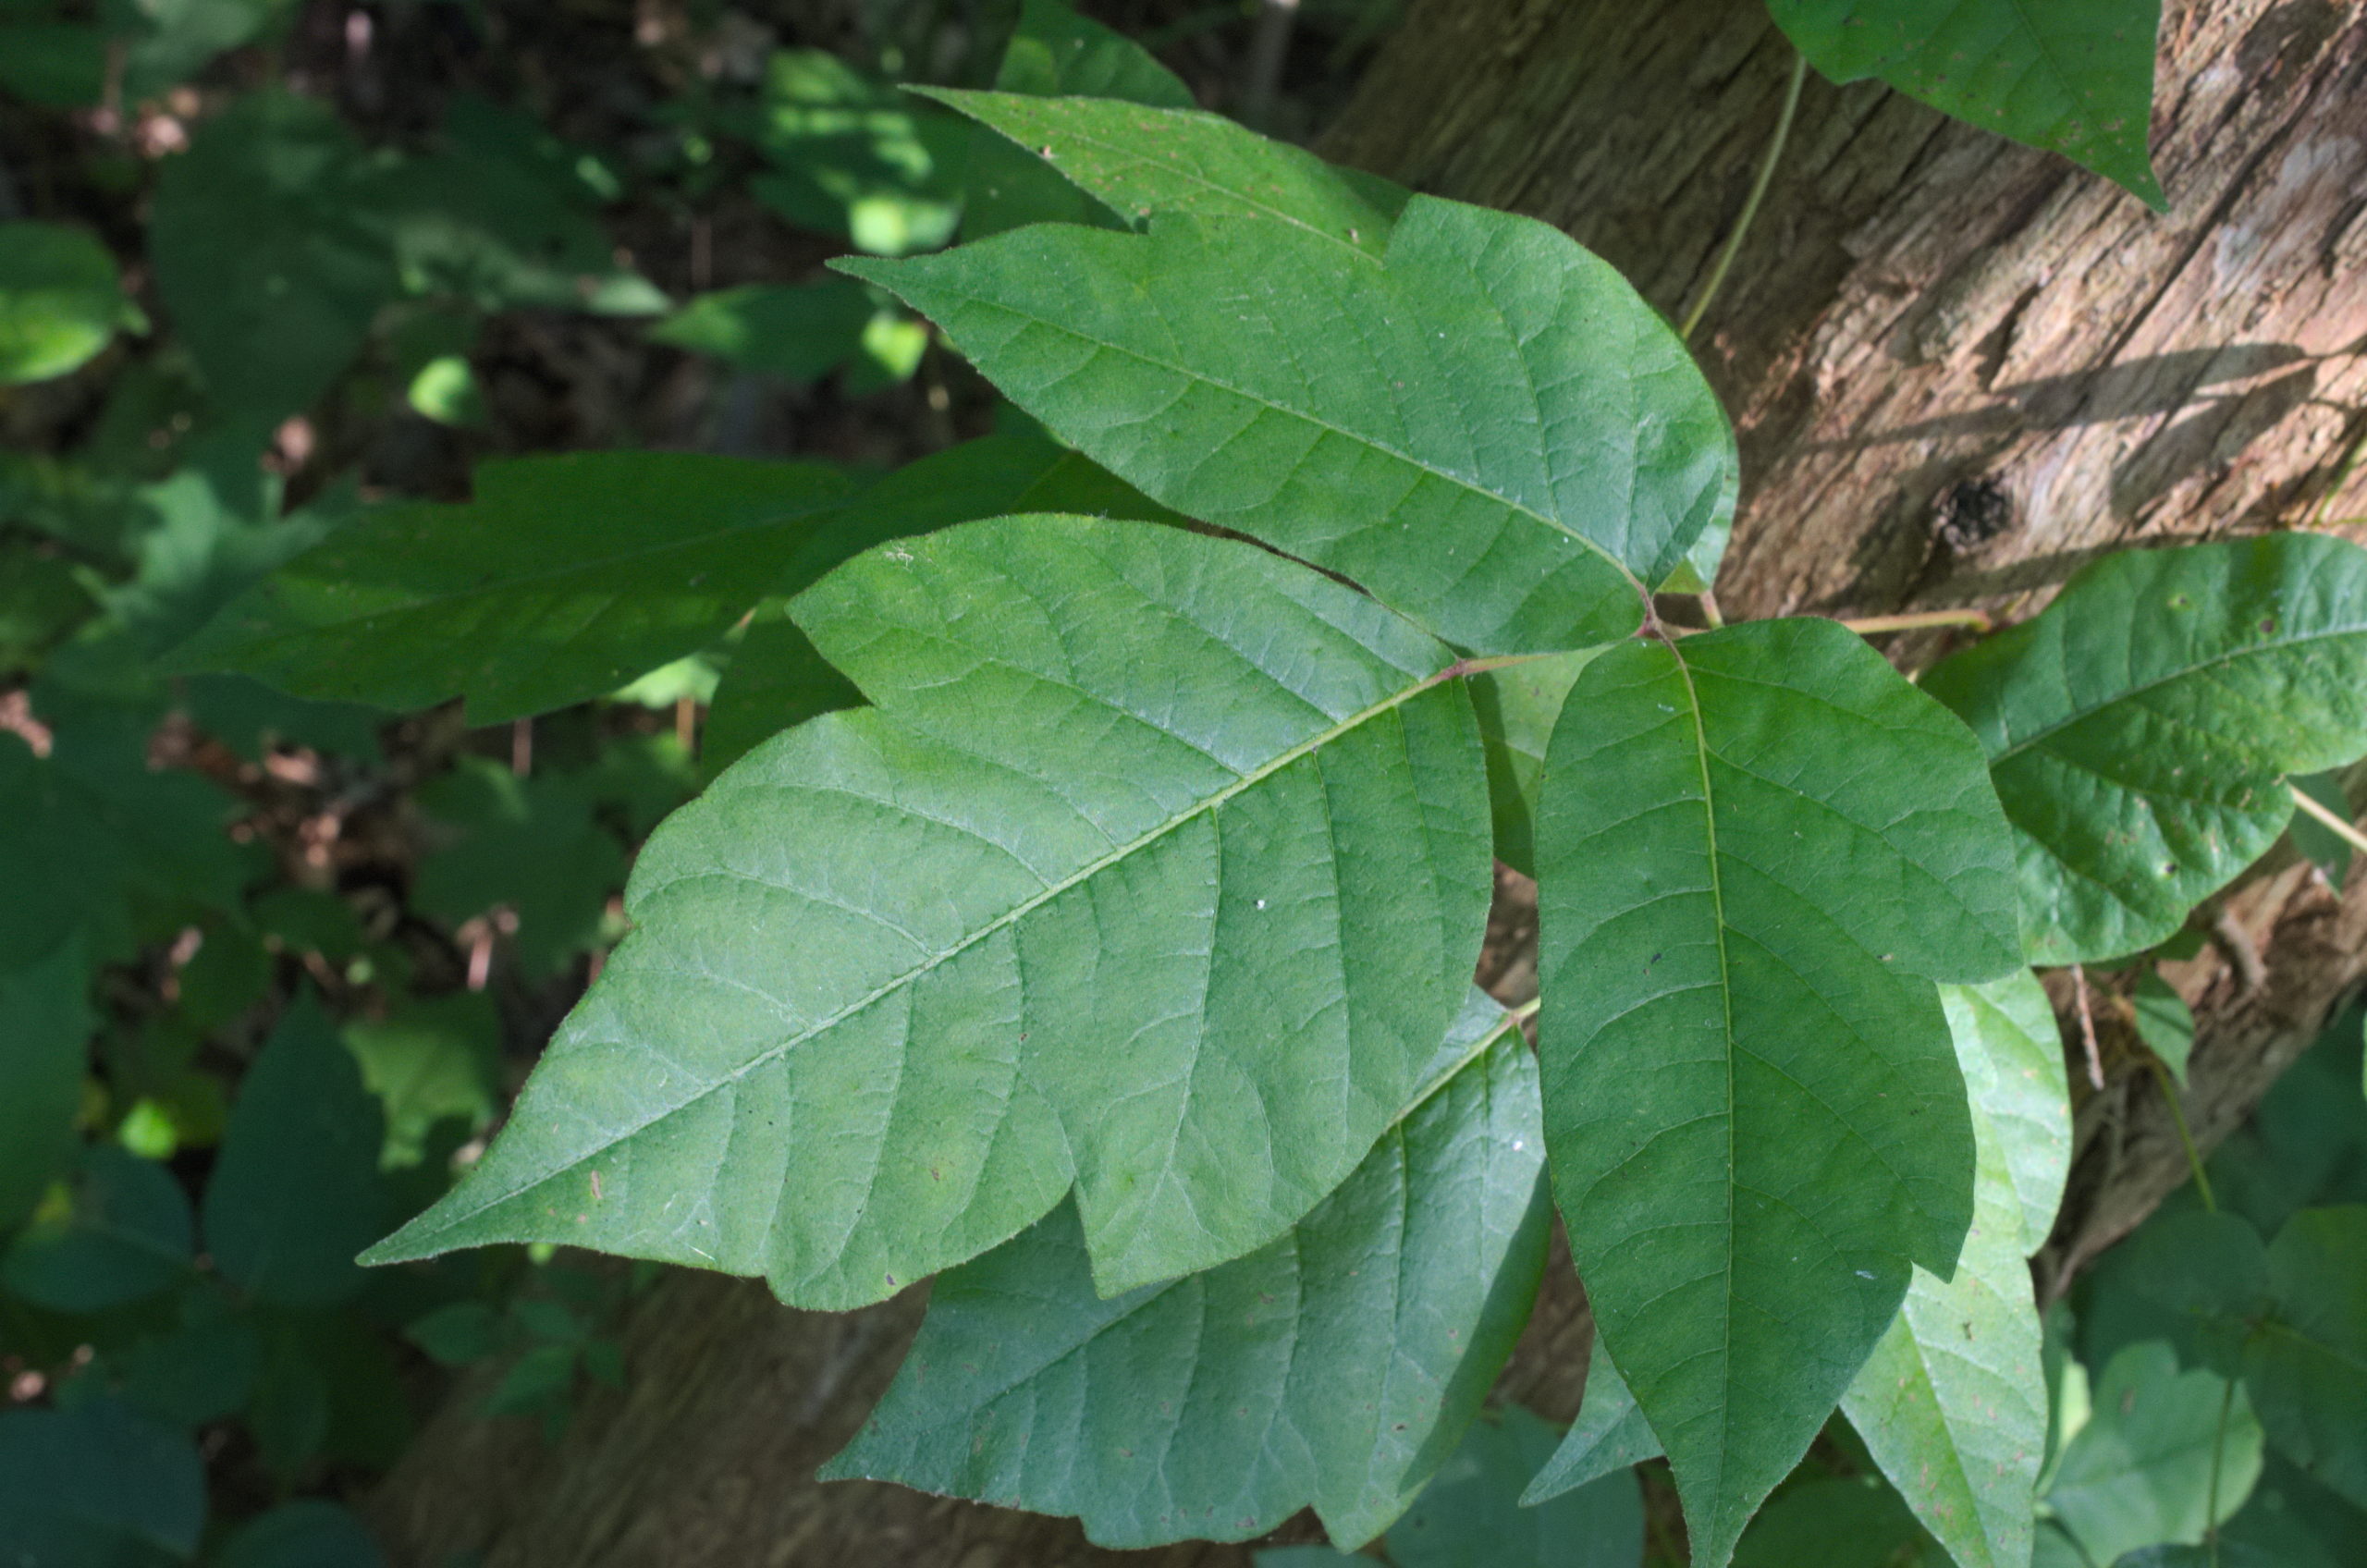 Poison Ivy: What You May Not Know - The New York Times